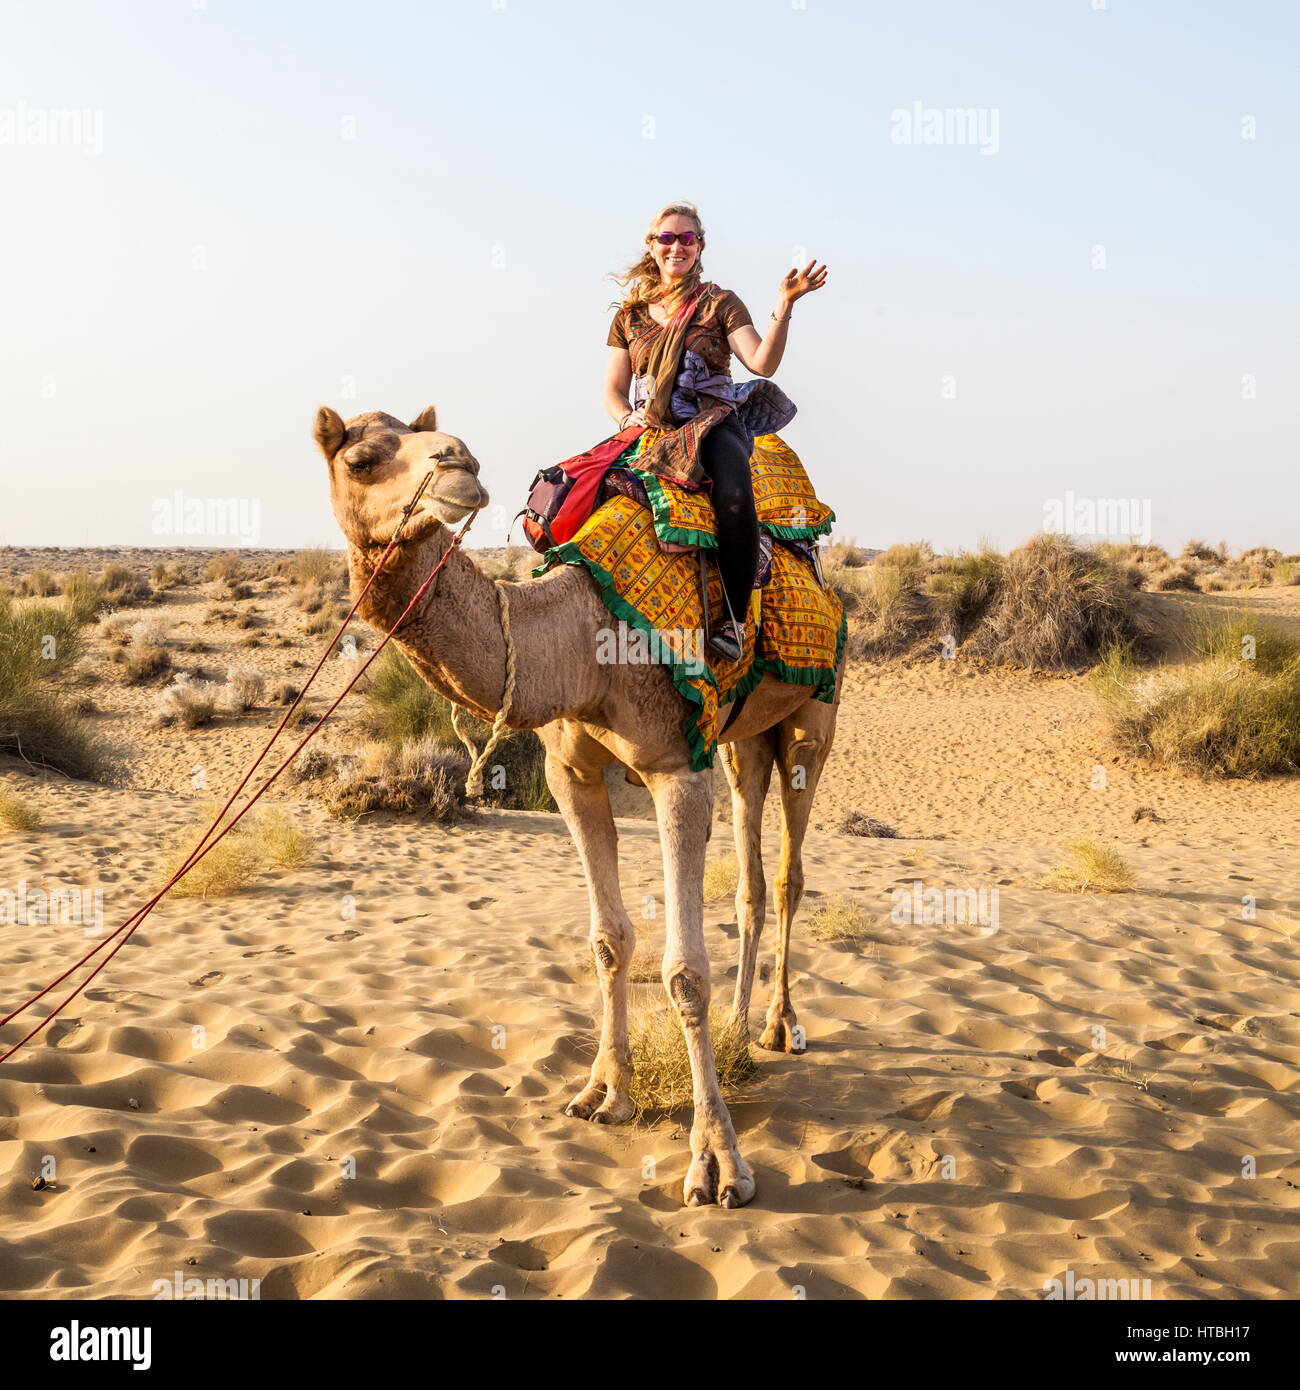 A woman waving and smiling atop a camel she is riding, Thar desert, Rajasthan, India. Stock Photo